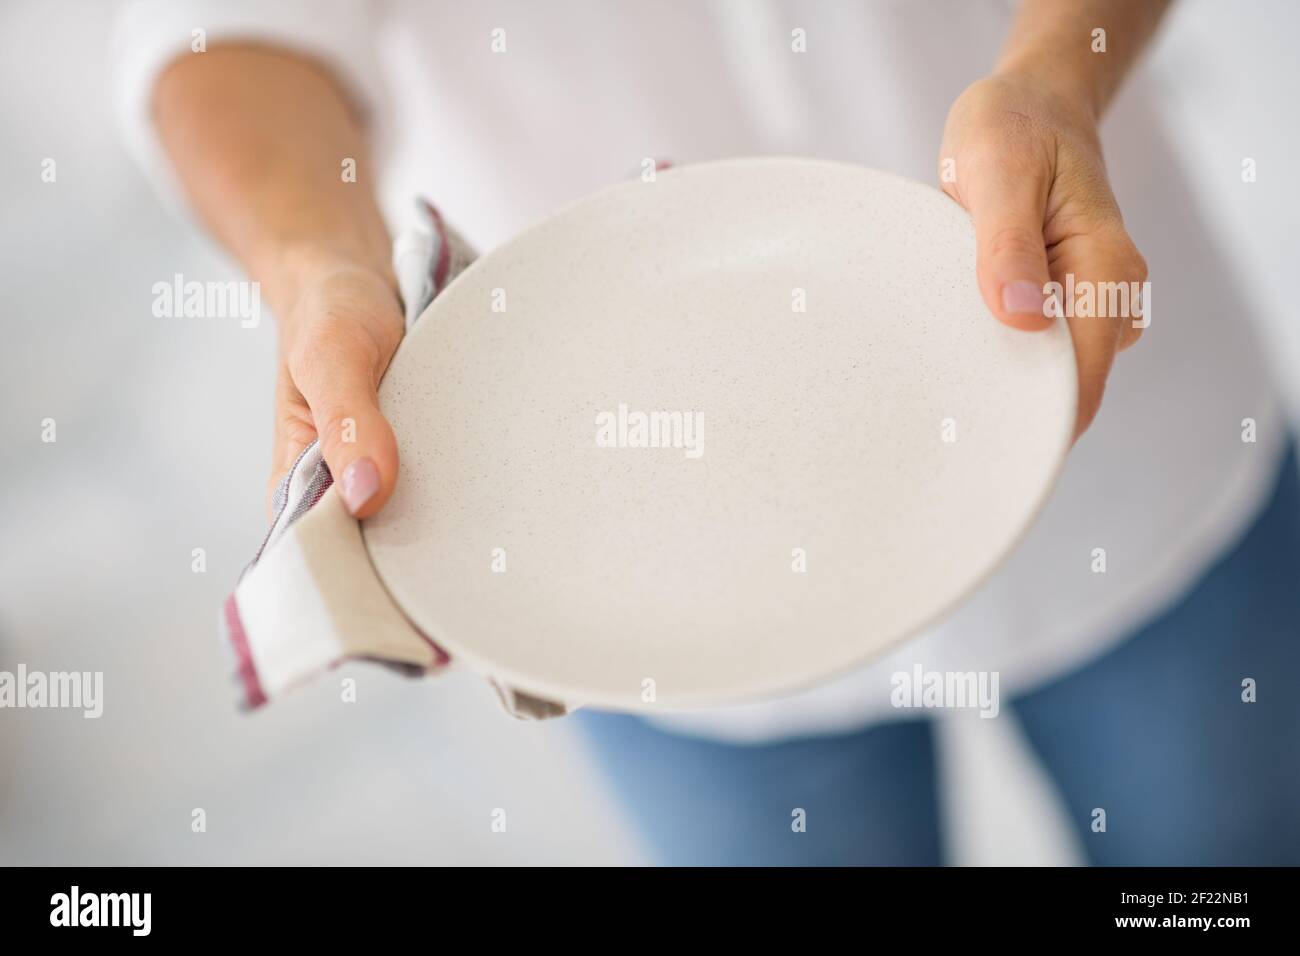 Close up picture of a woman with plate in hands Stock Photo